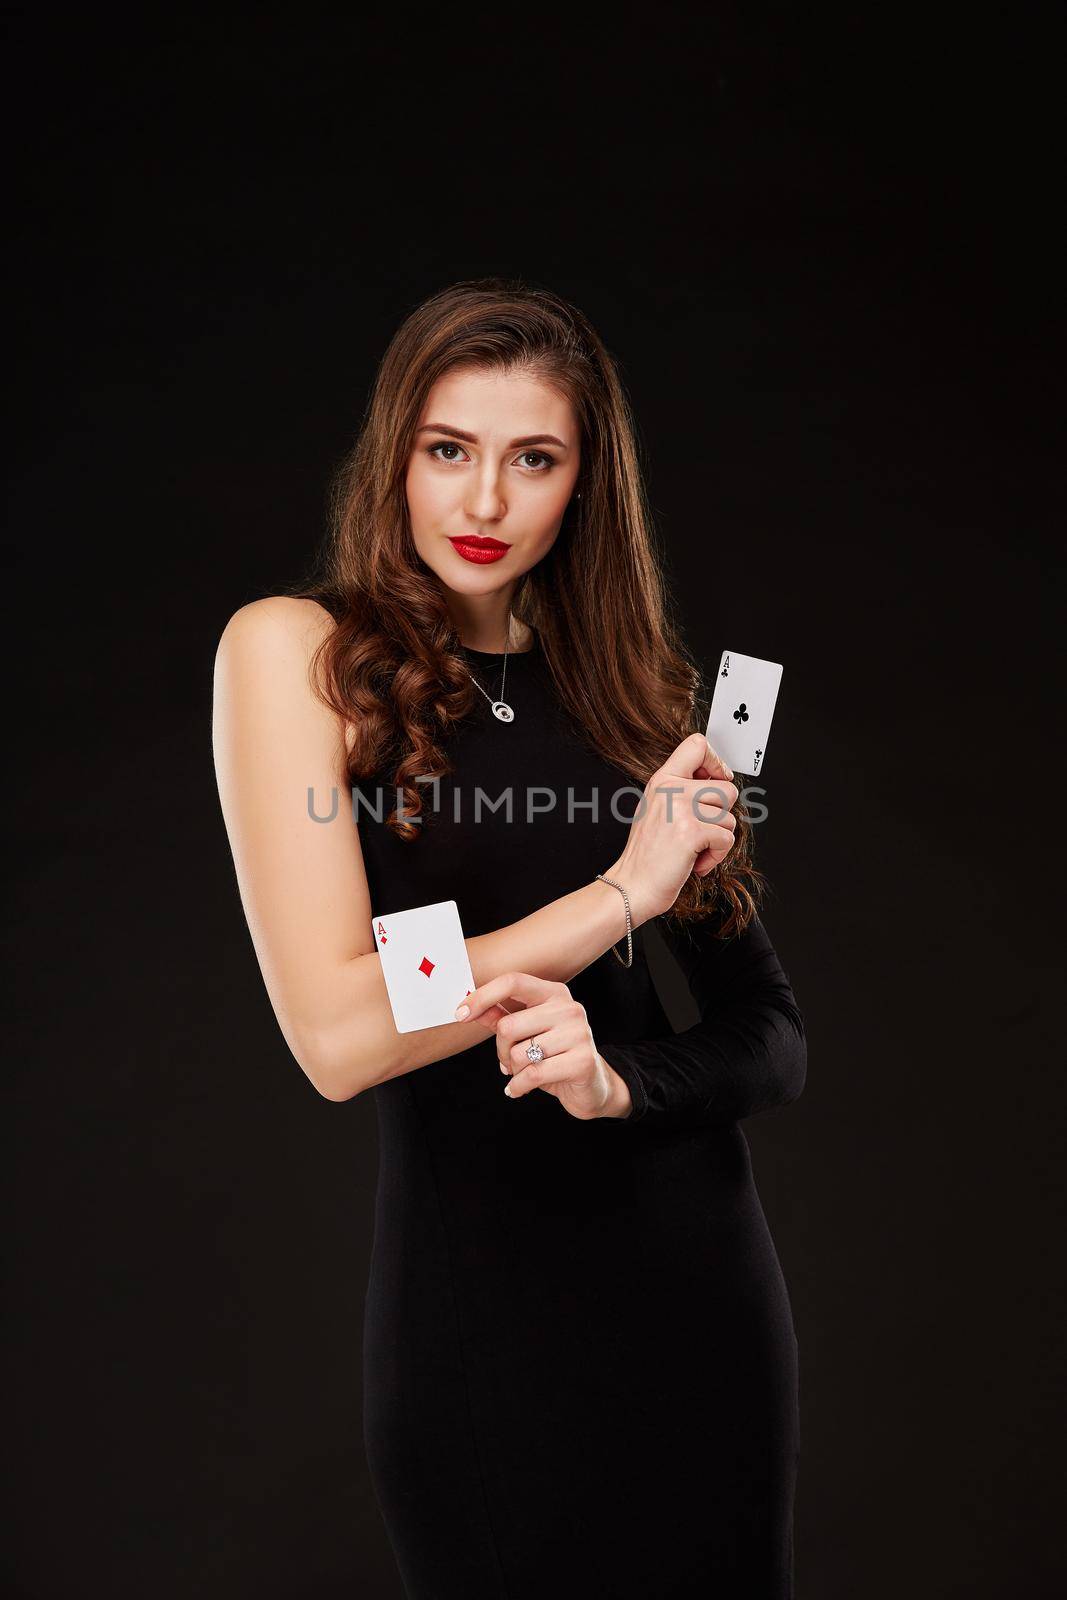 Attractive young woman in a sexy black dress holding the winning combination of poker cards. Two Aces. Studio shot on a black background. Casino